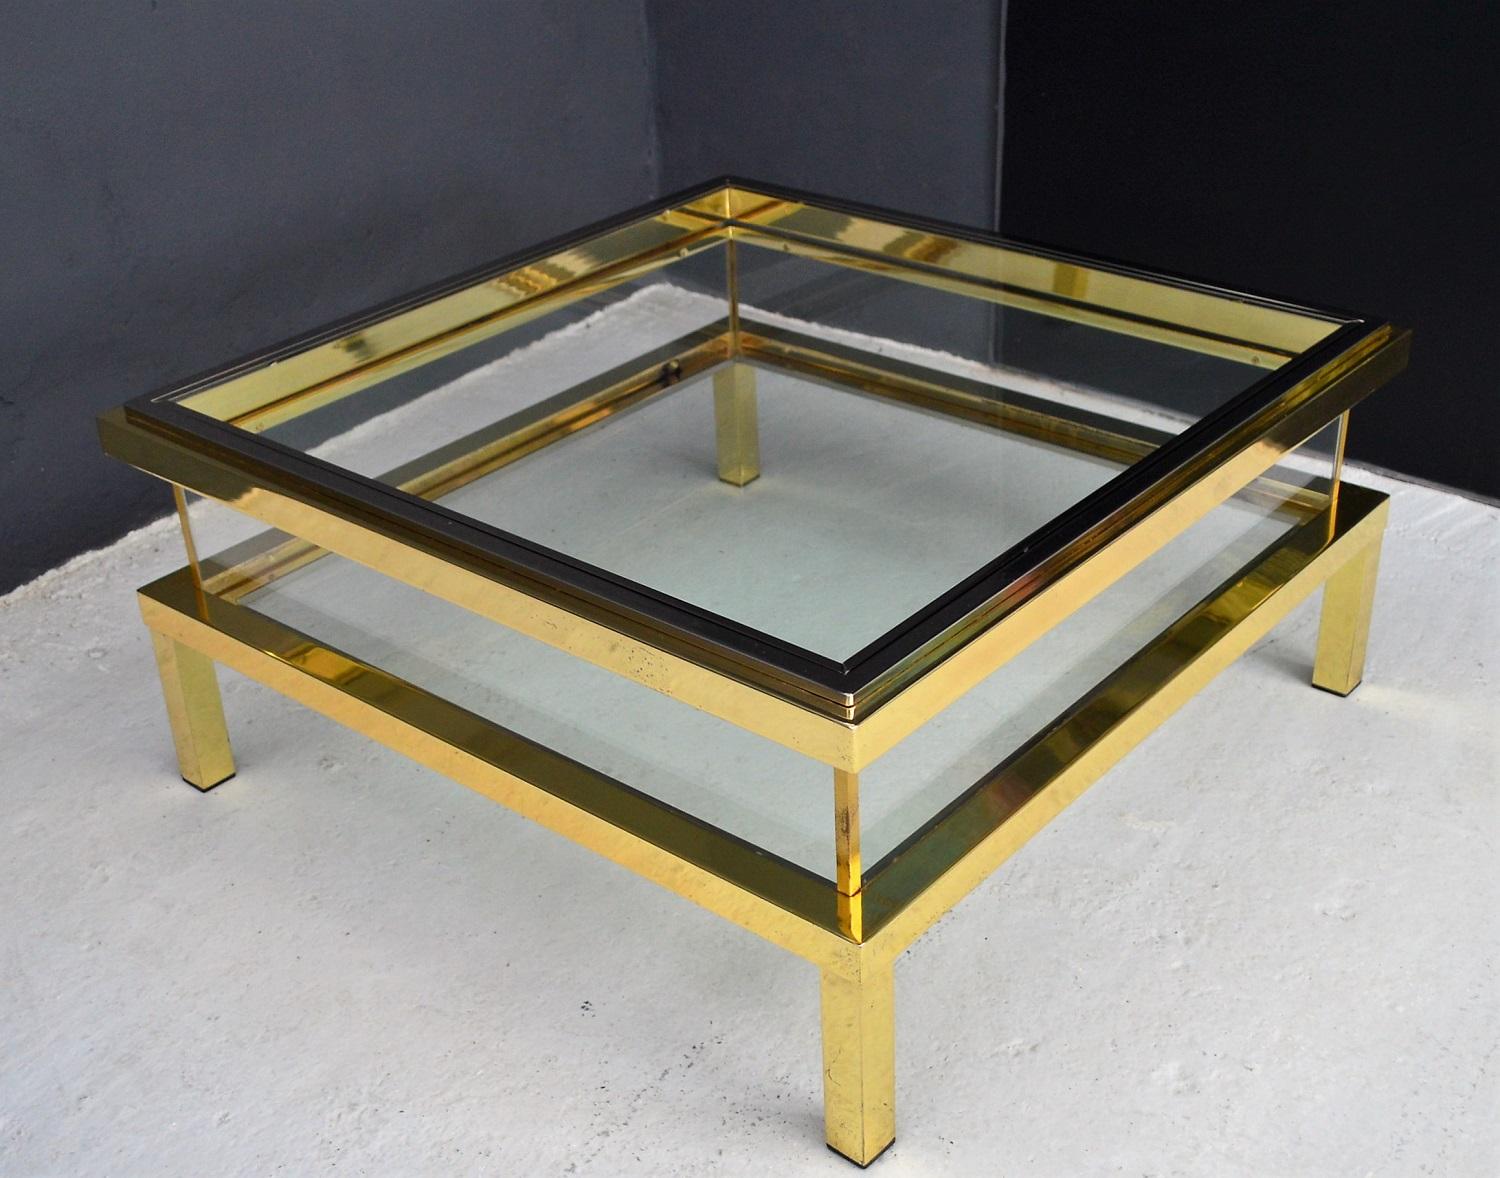 Beautiful coffee table made of shiny Brass with chrome details and glass slide-on showcase manufactured by Maison Jansen in the 1970s, France.
The table is very heavy, the used materials and craftsmanship excellent.
Very good vintage condition